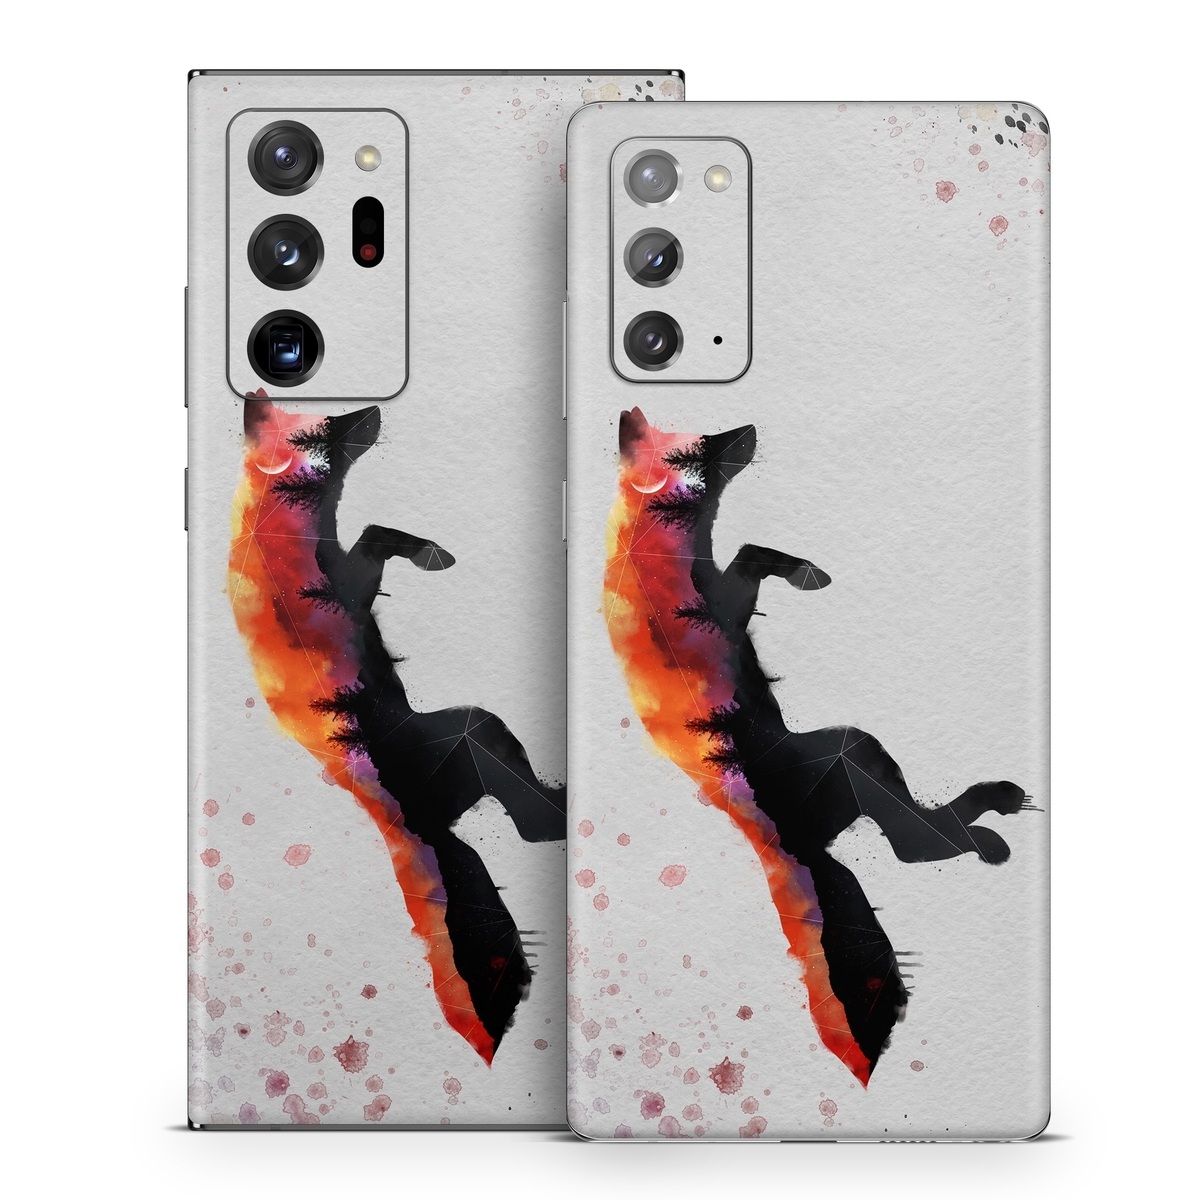 Samsung Galaxy Note 20 Skin design of Illustration, Watercolor paint, Art, Graphic design, Painting, Red fox, Visual arts, Paint, Drawing, Tail, with gray, black, red, yellow, orange, white colors